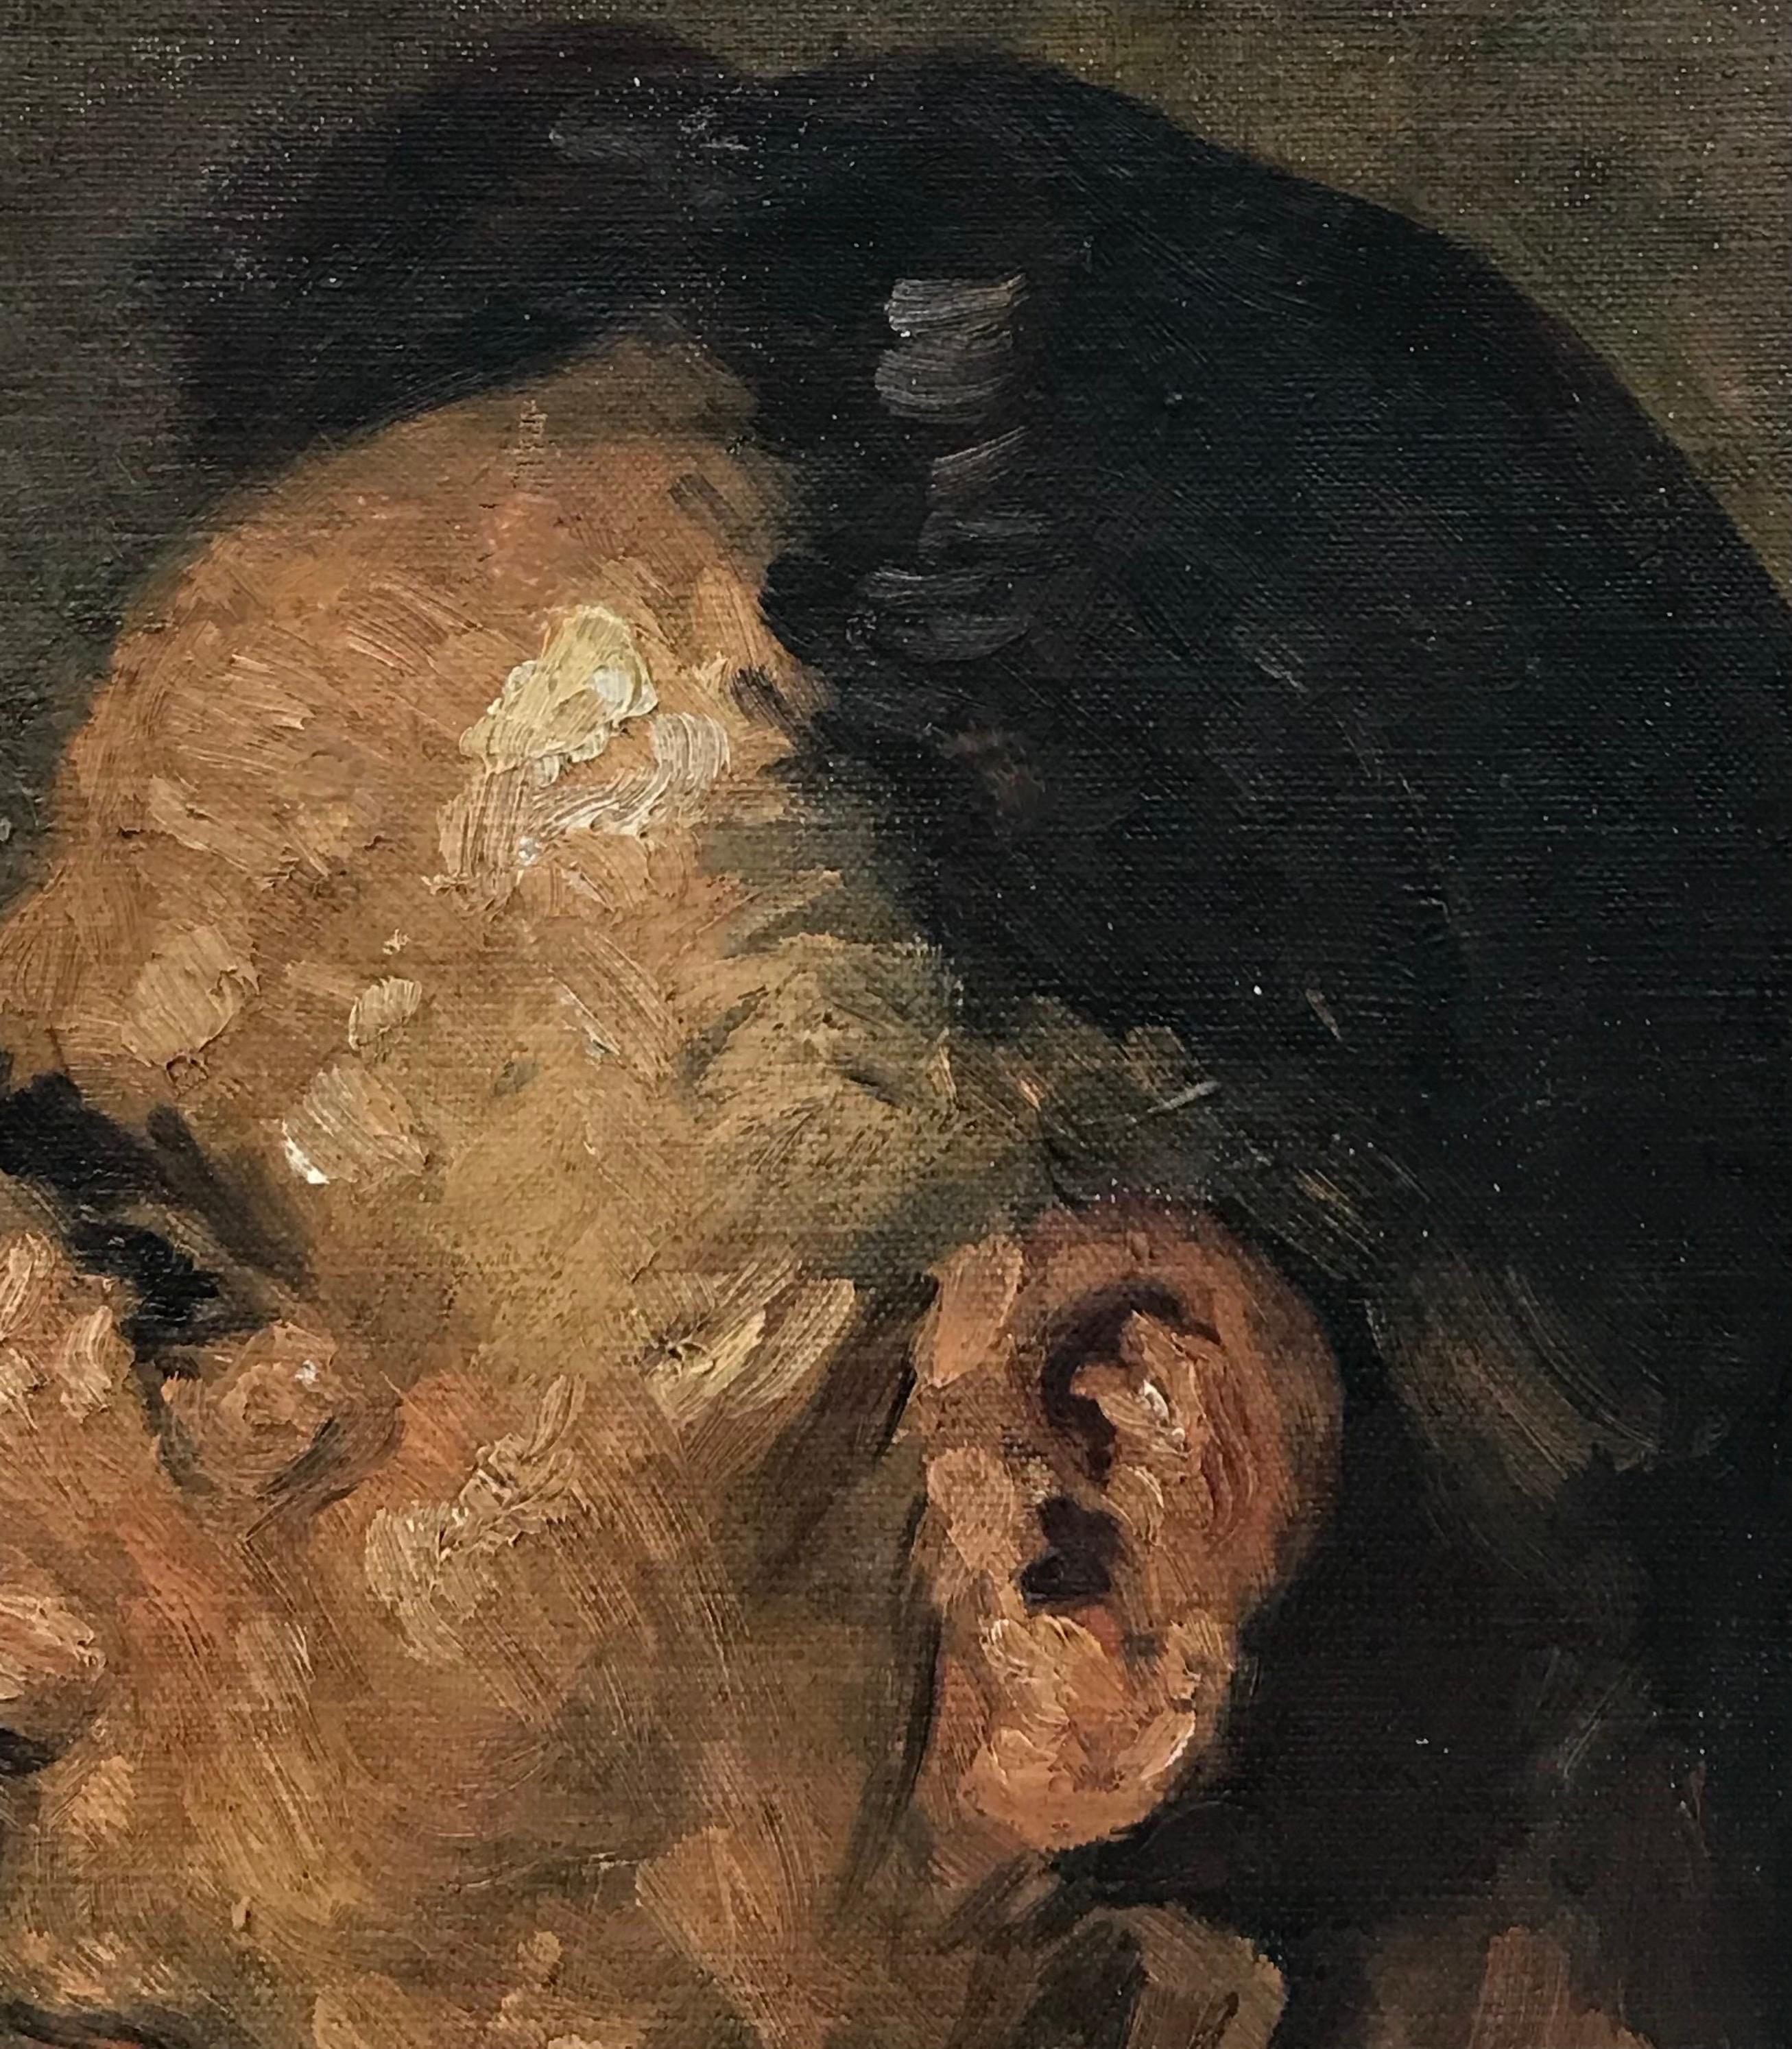 Artist/ School: French School, early 1900's

Title: Profile portrait of a mans head. 

Medium: oil on canvas stuck down over board, unframed

Board: 15.5 x 11.5 inches

Provenance: private collection, France

Condition: The painting is in overall